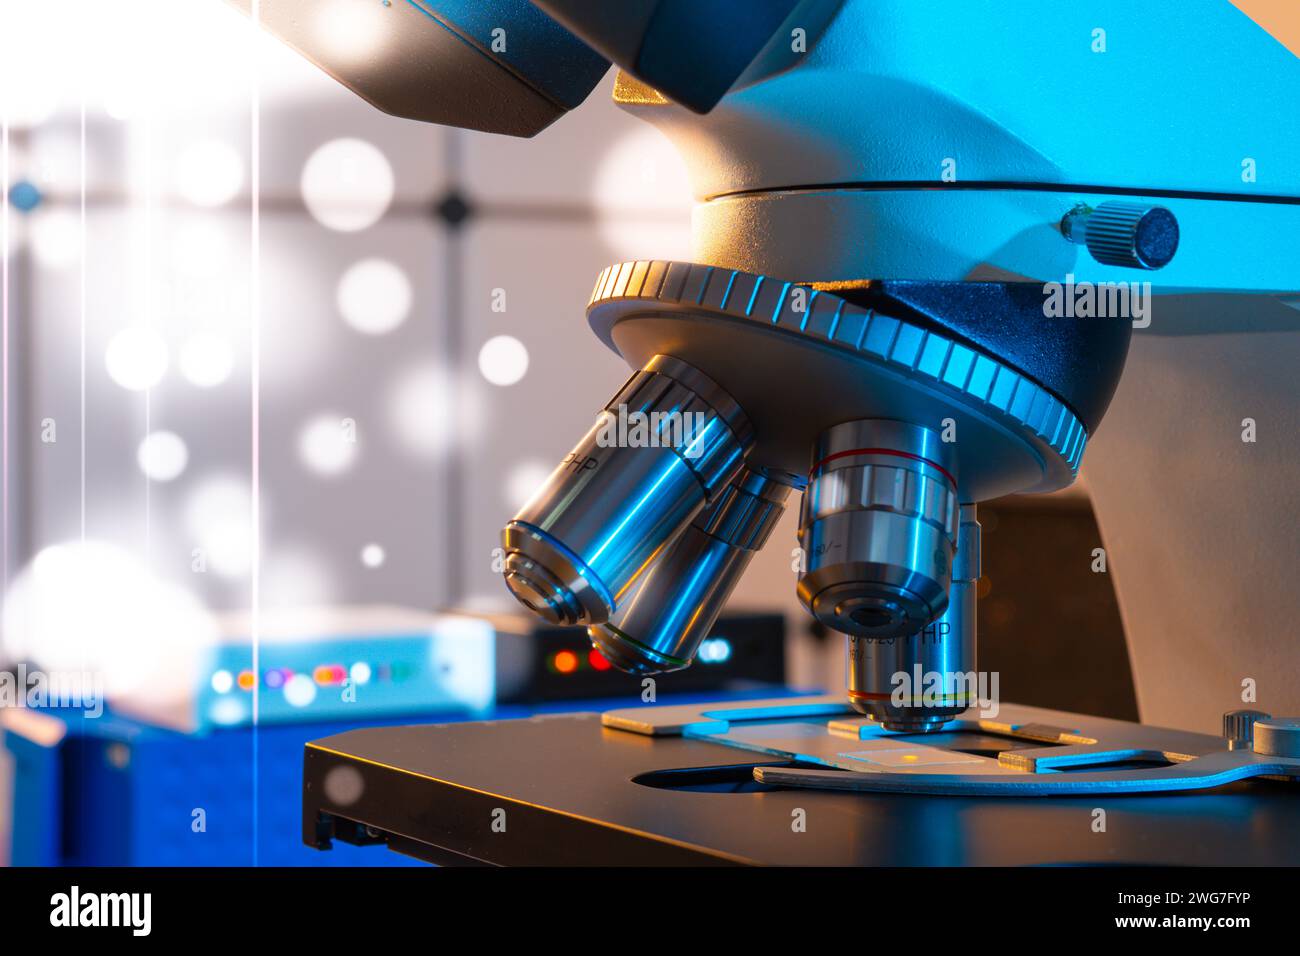 Virology: Optical microscopes help virologists visualize viruses, study their structure, replication, and interactions with host cells. Stock Photo